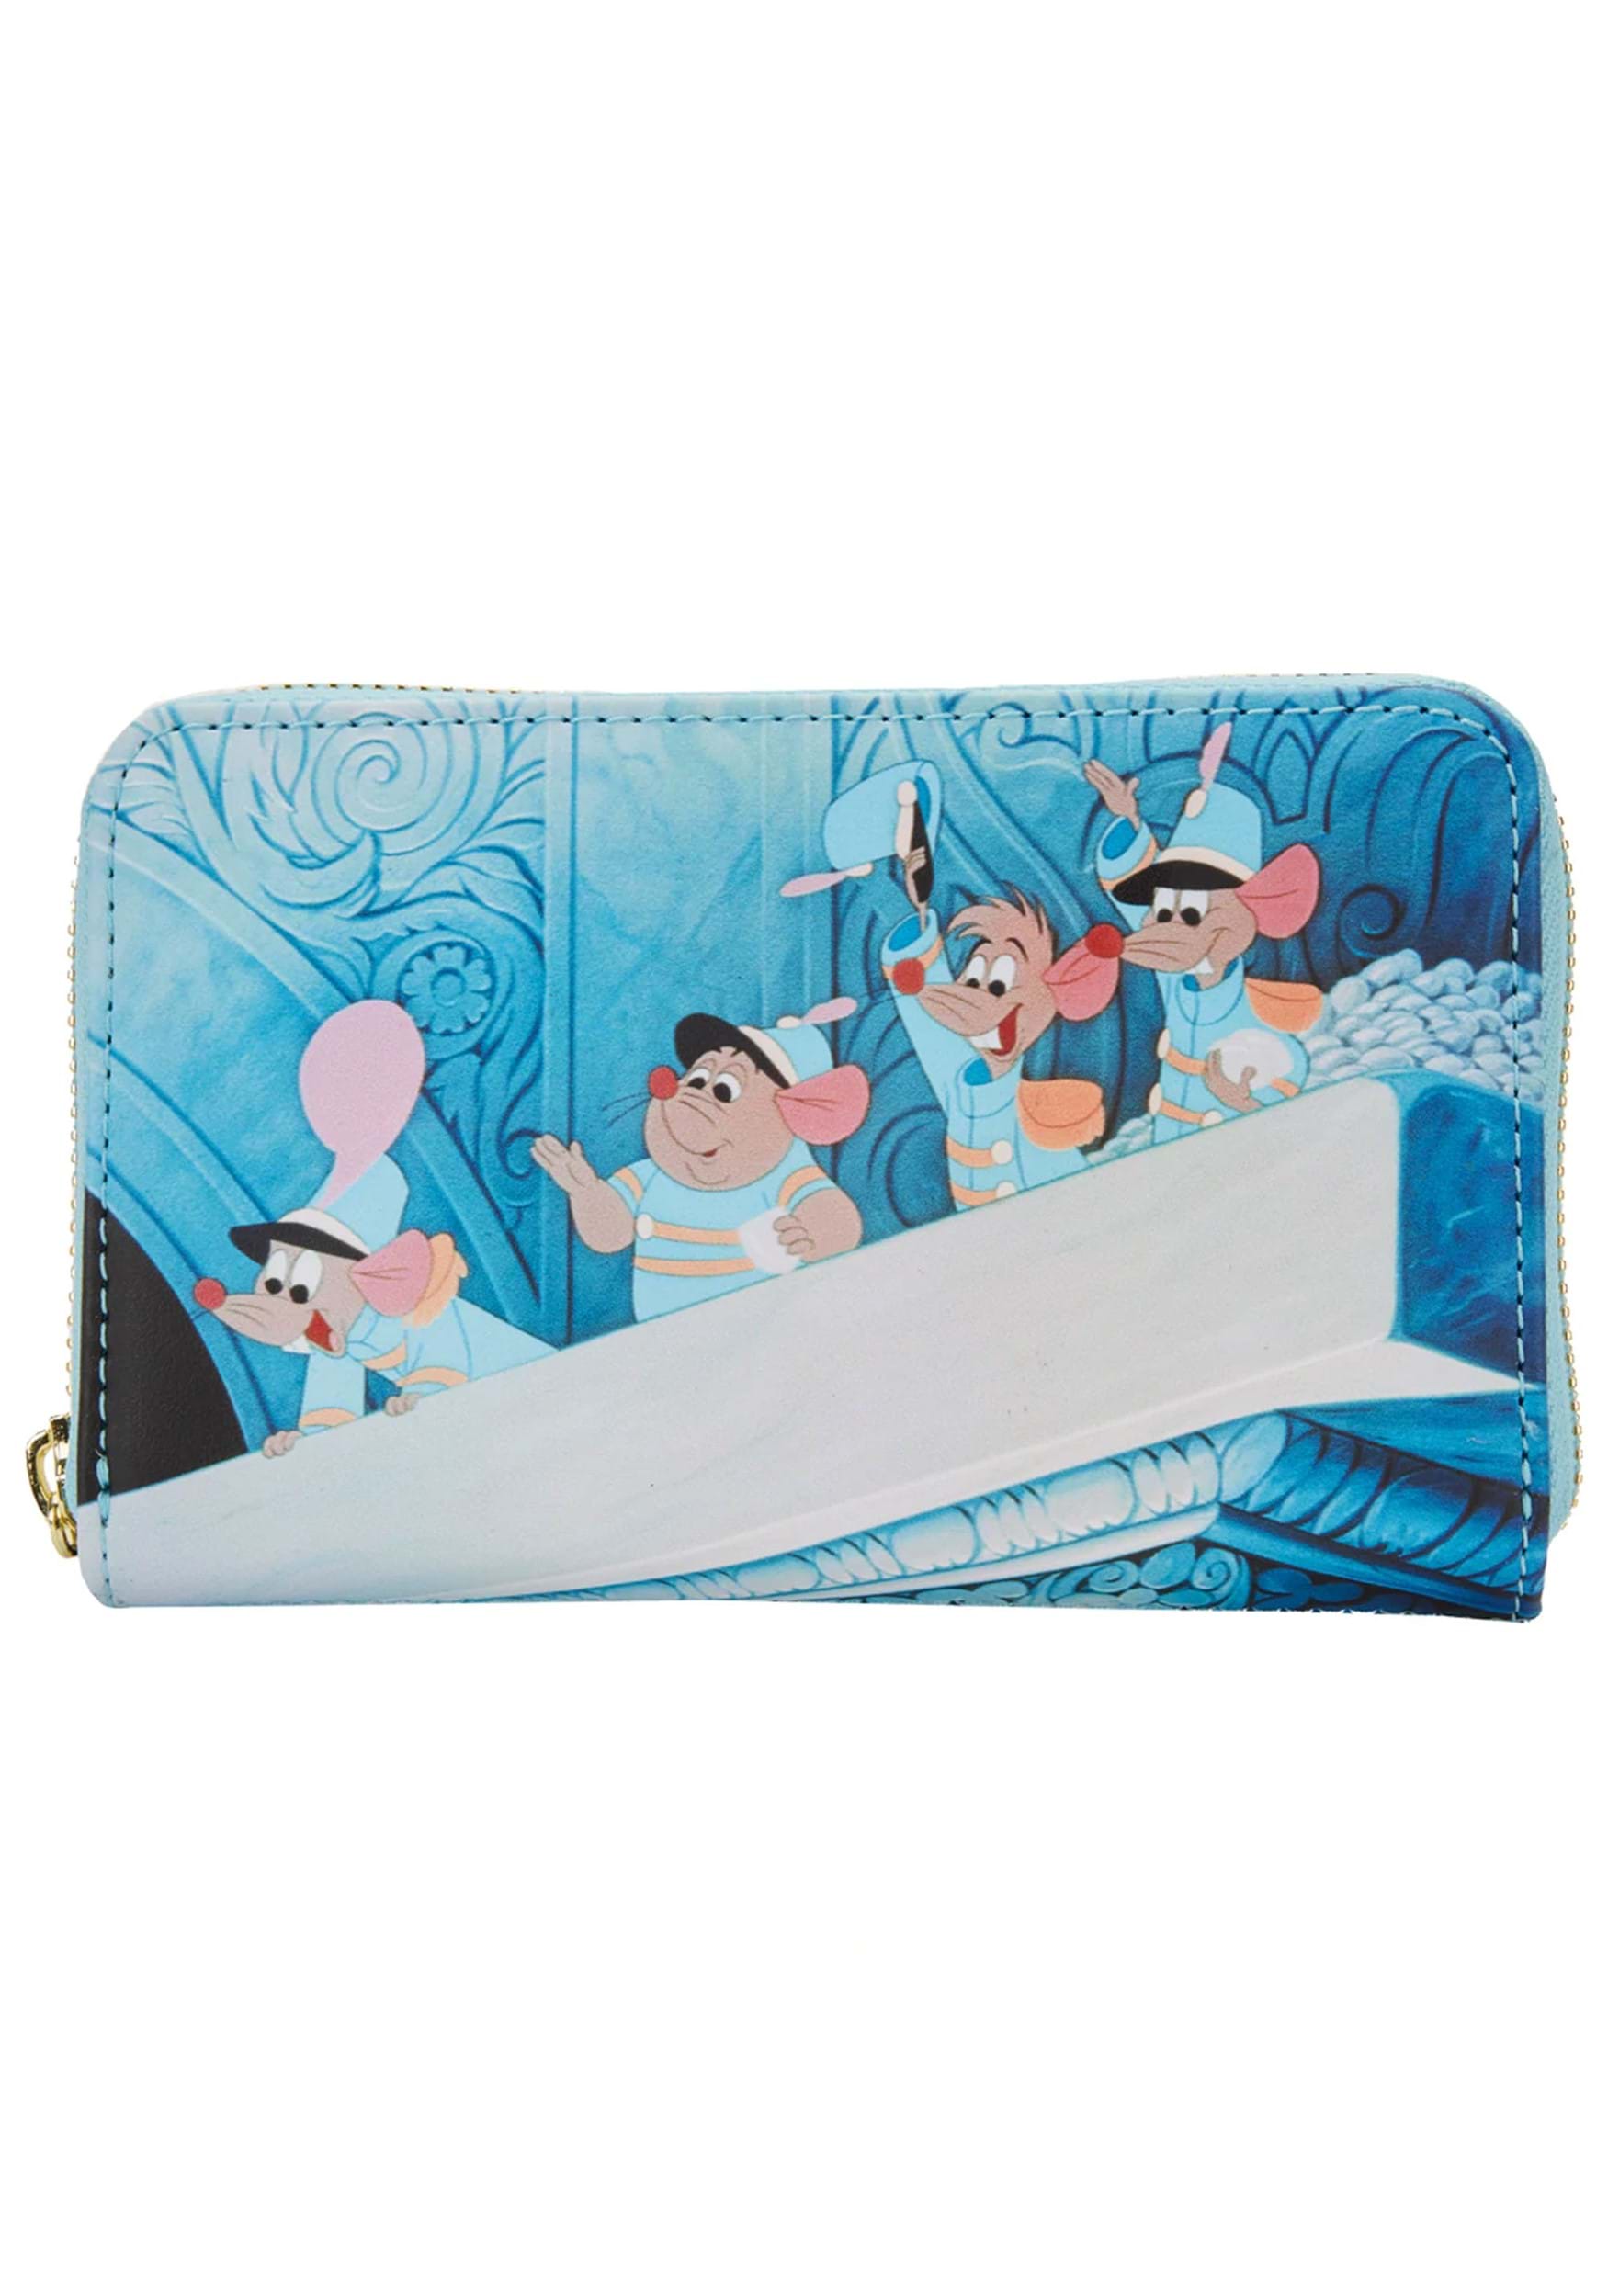 Disney Pencil Bag Case Pen Mickey Mouse Alice Princess Winnie the Pooh Clear New 